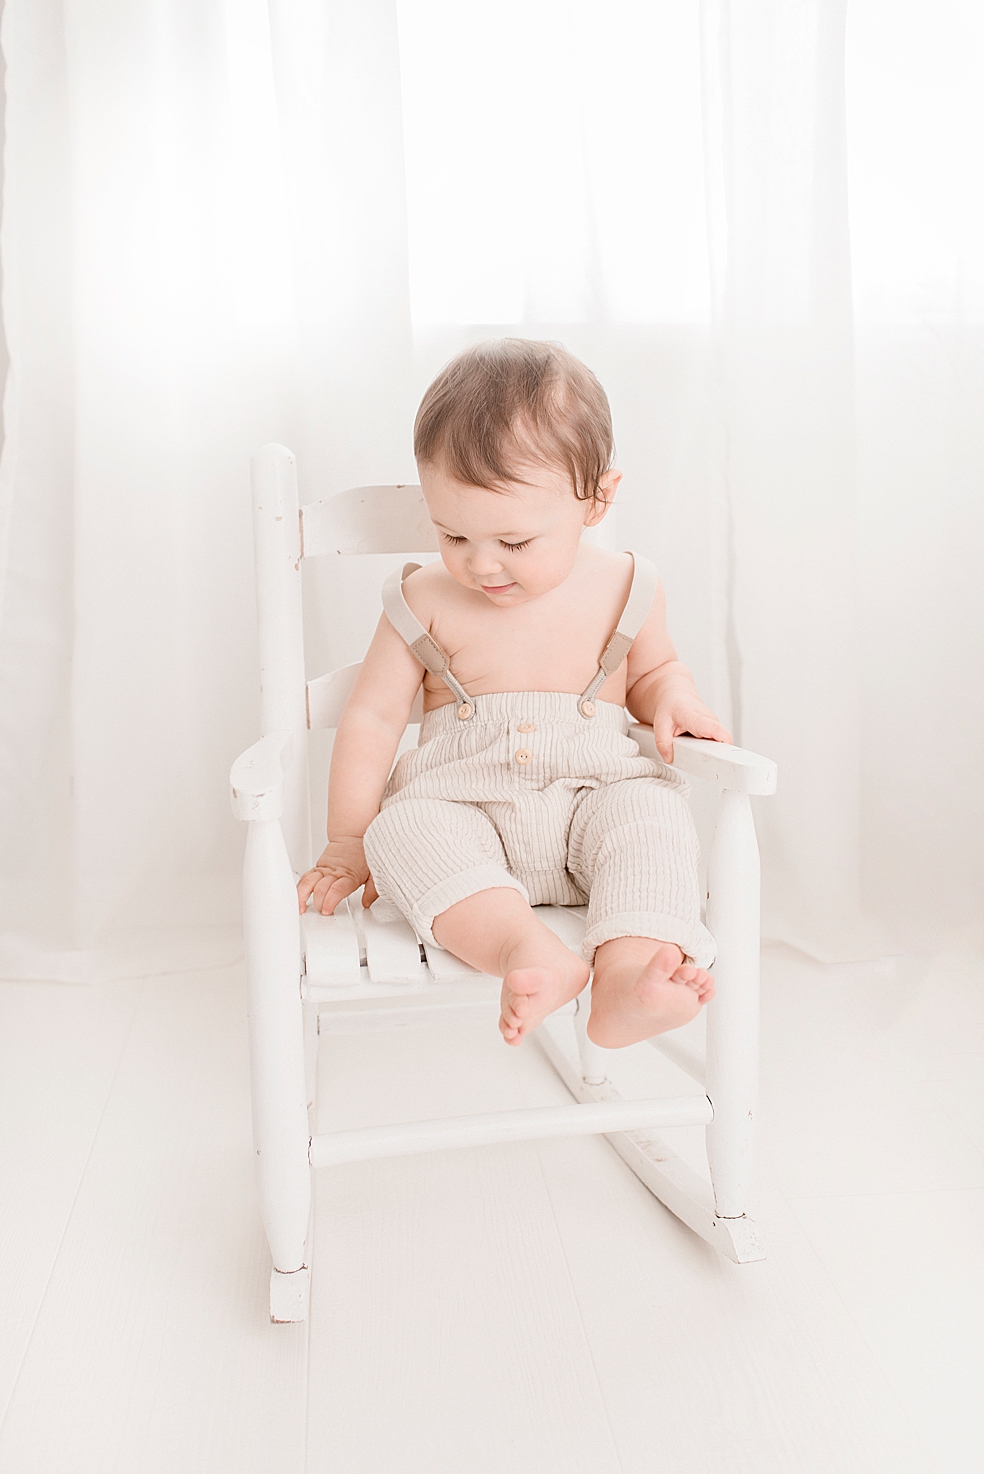 Toddler boy in overalls sitting in white rocking chair | Photo by Huntsville Baby Photographer Jessica Lee 